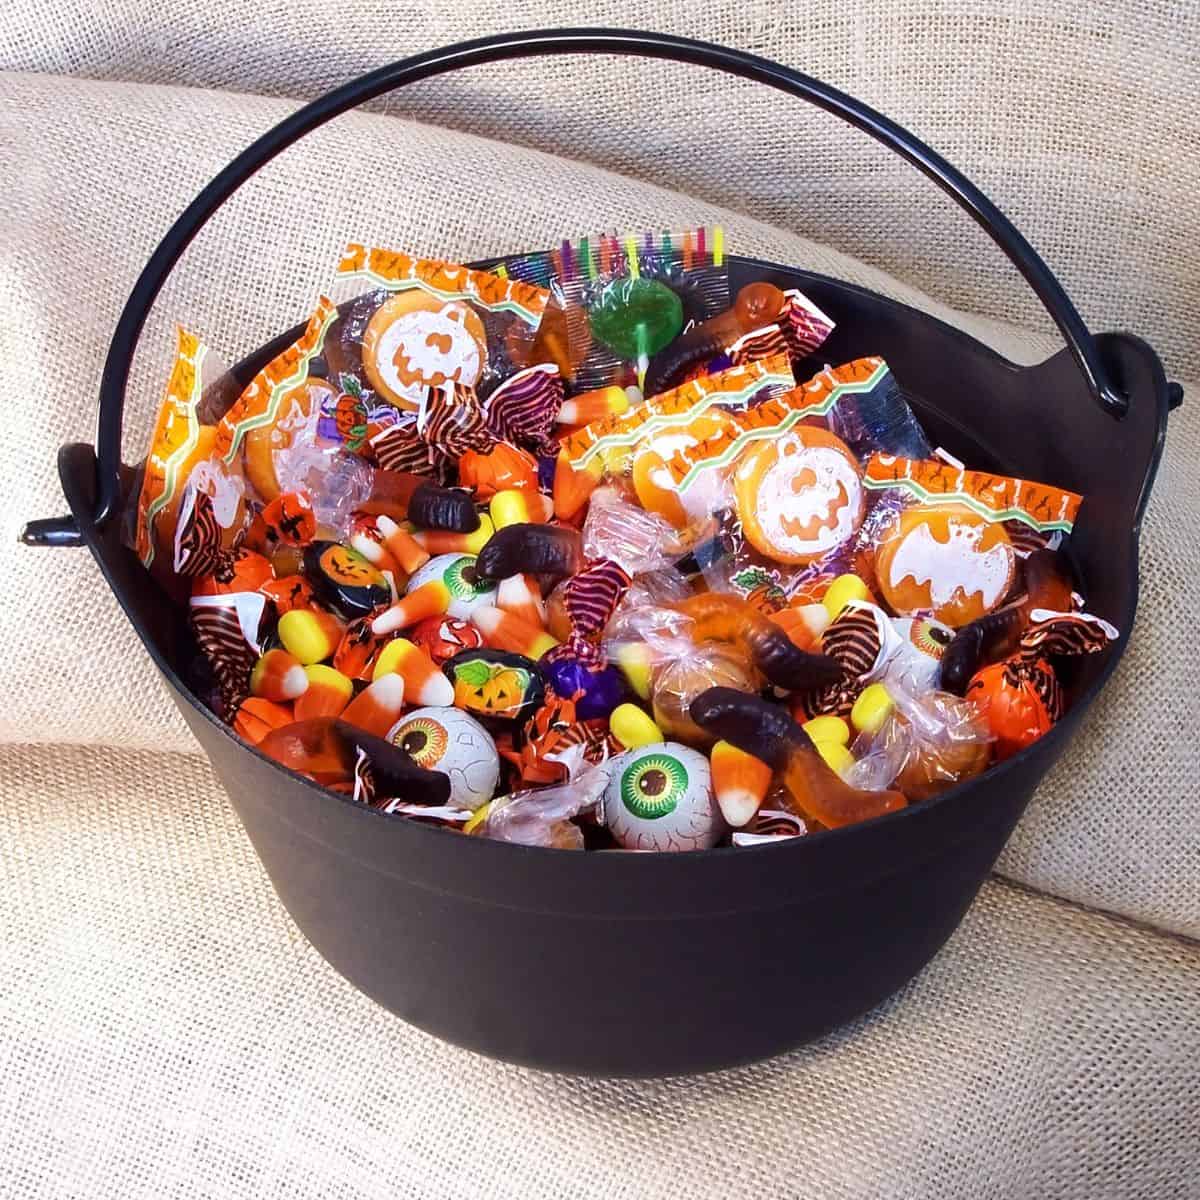 A black bucket of traditional Halloween candy